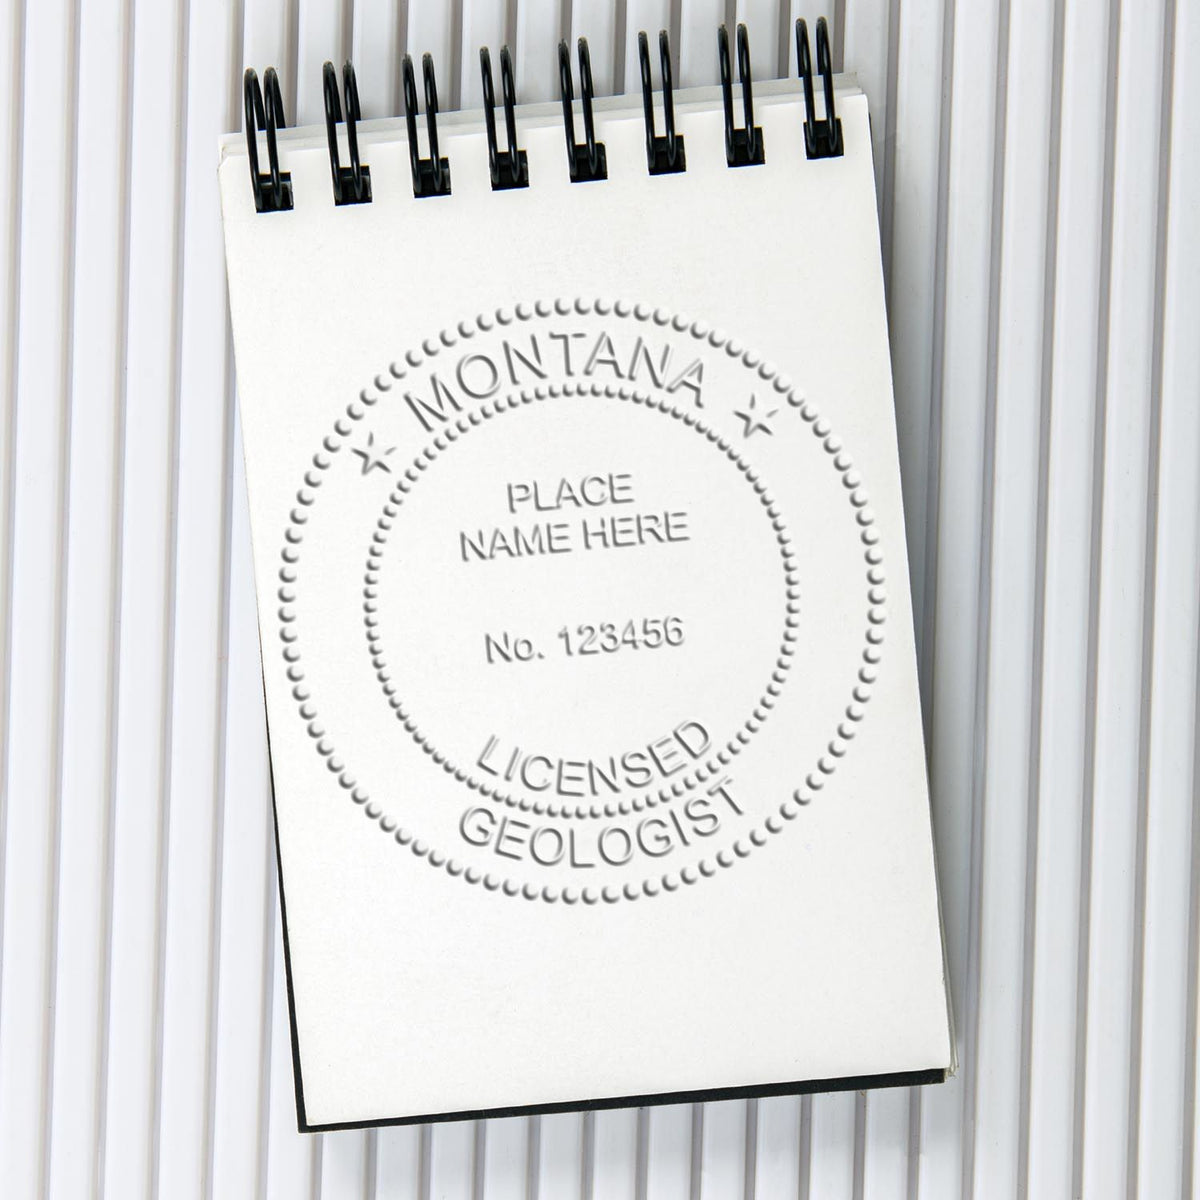 A photograph of the Soft Montana Professional Geologist Seal stamp impression reveals a vivid, professional image of the on paper.